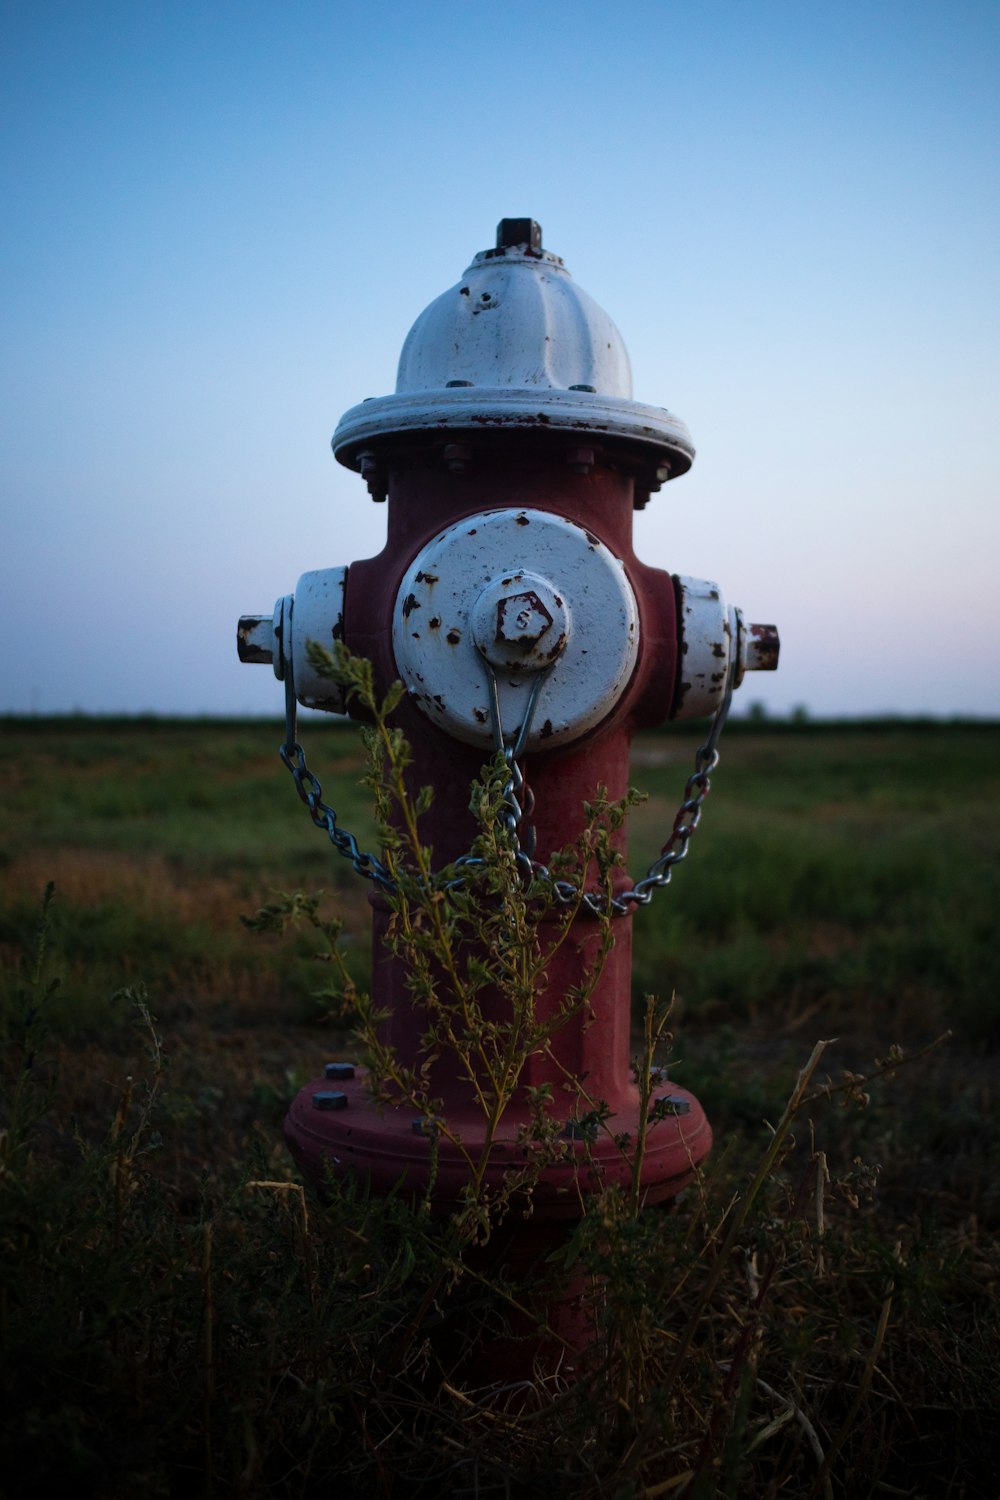 a red and white fire hydrant in a field